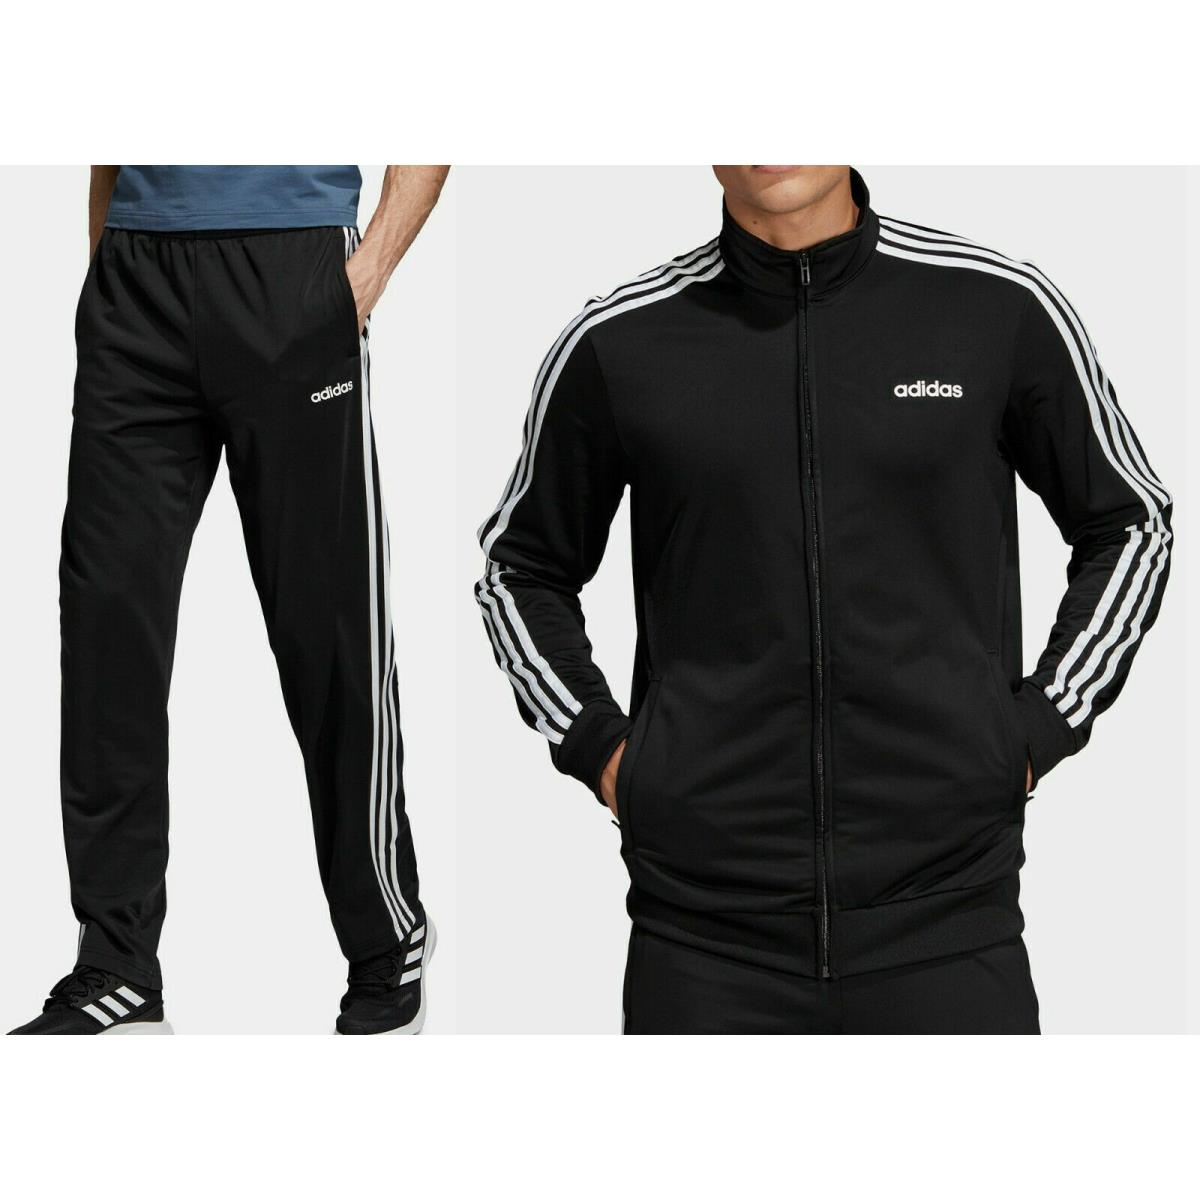 Adidas Men`s Matched Suite: Track Pants Jacket - Black/white - All Sizes